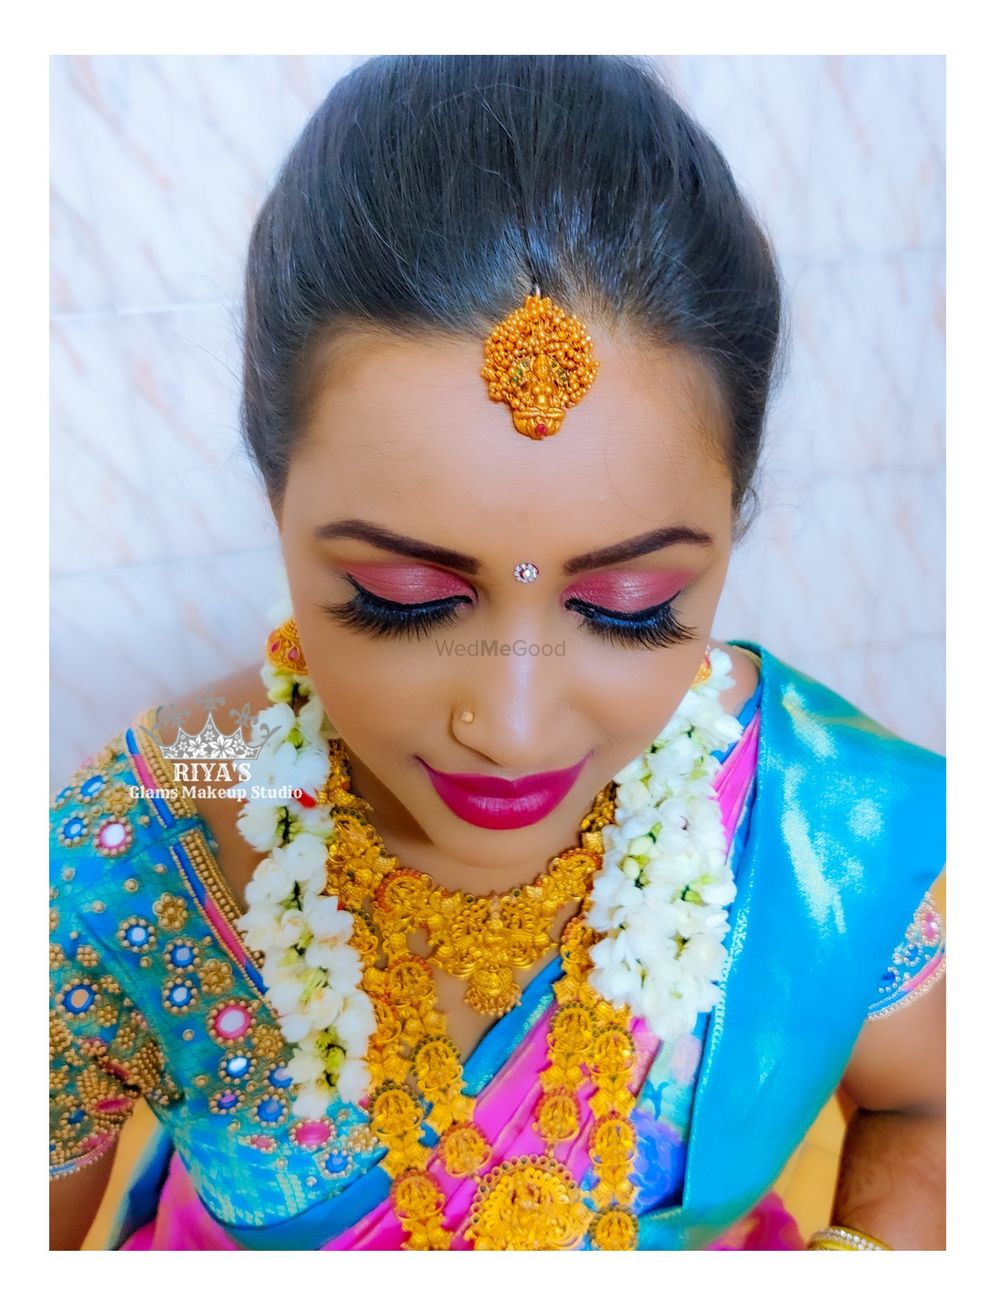 Photo From Muhurtham HD - By Glams Makeup Studio